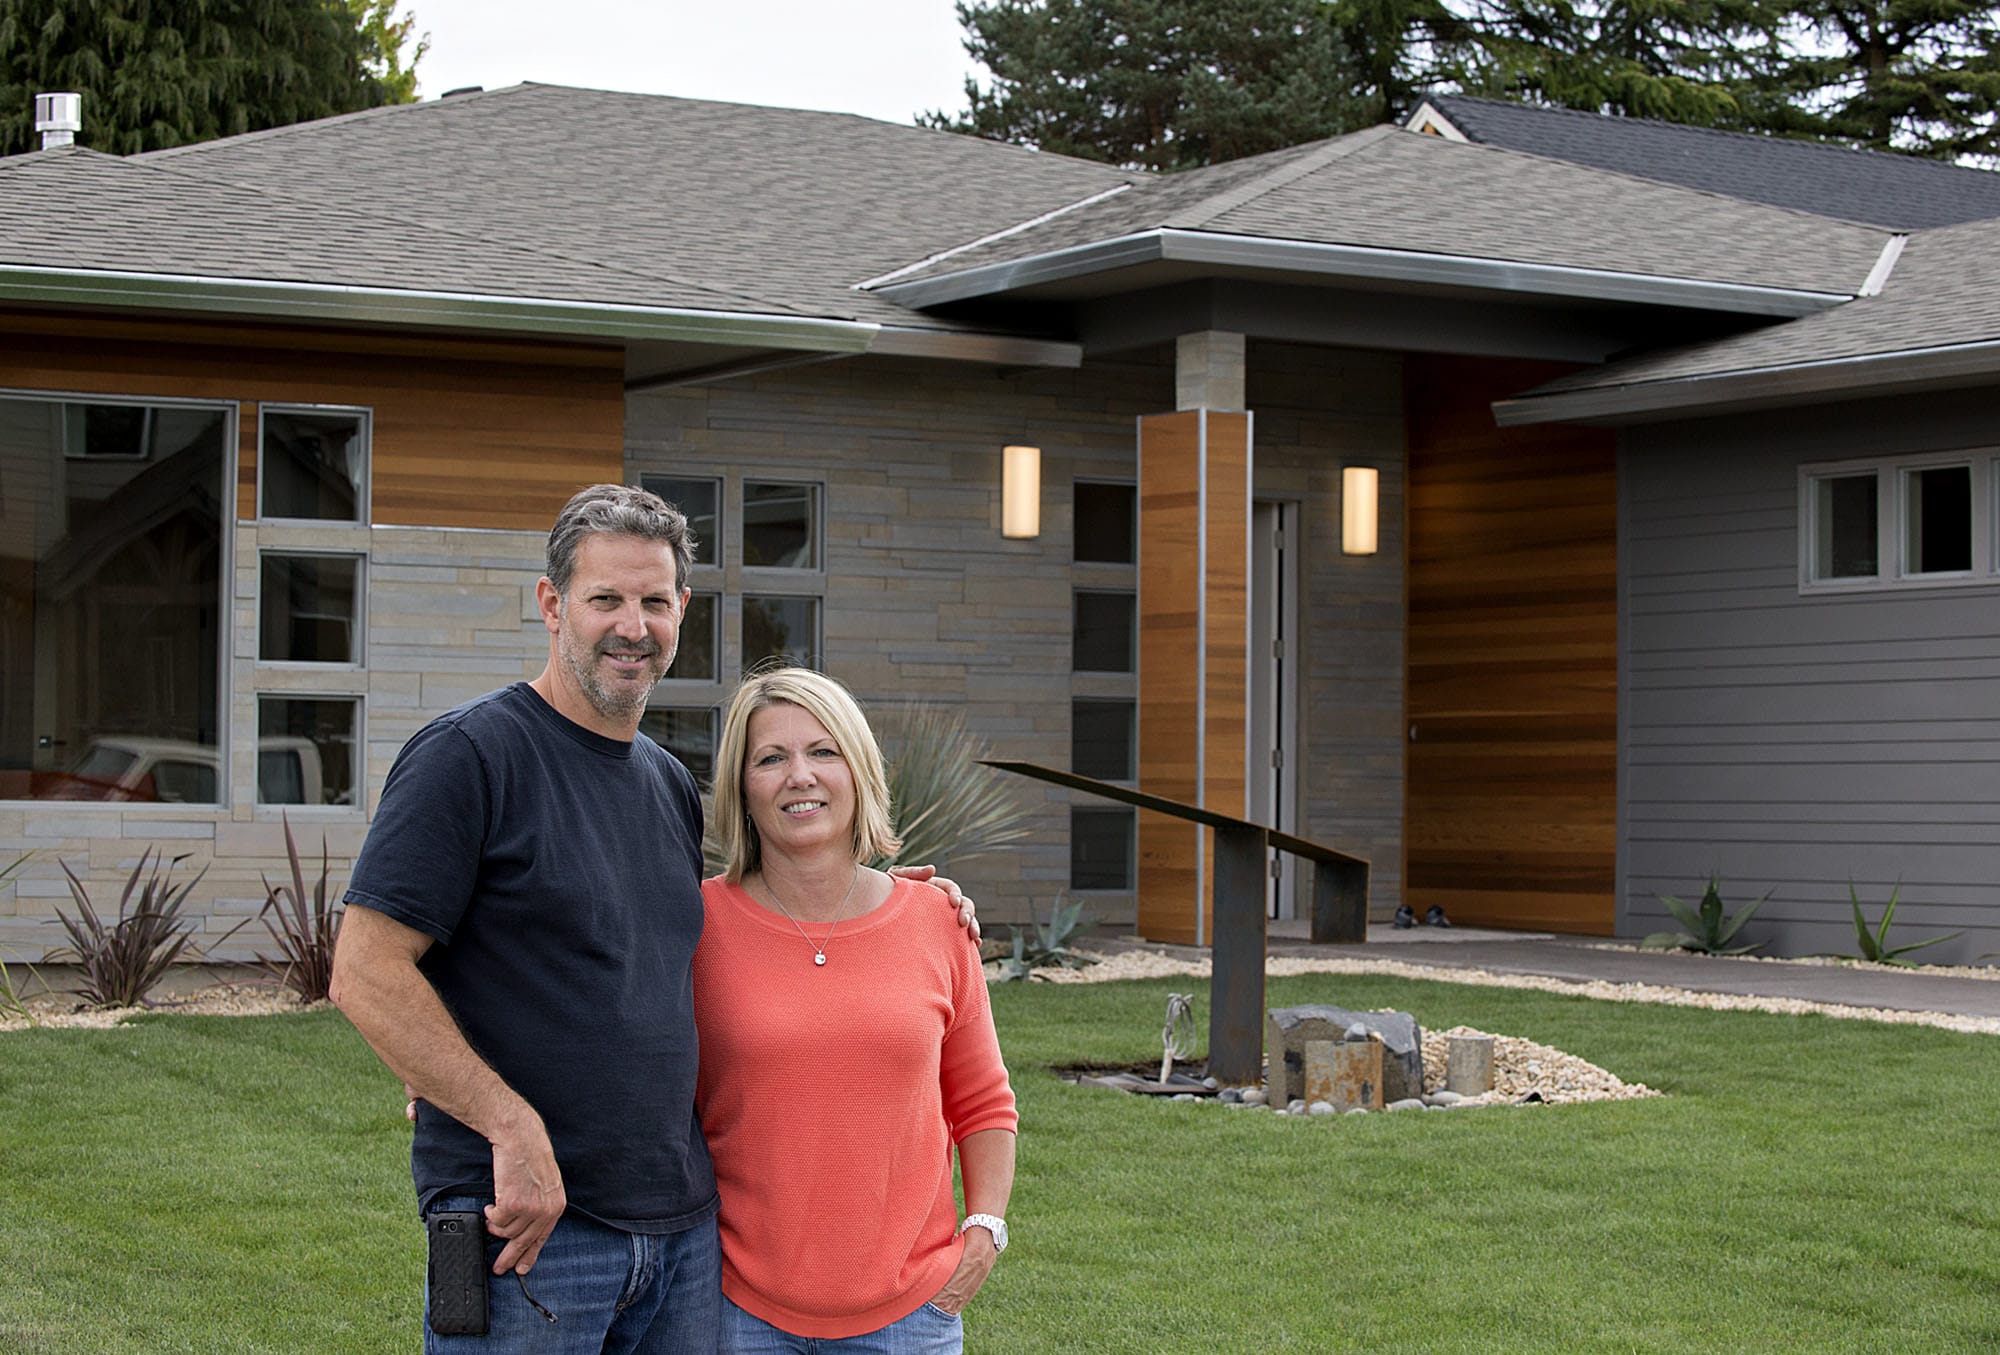 John Taylor, owner of Modern Home Design & Build, and his wife, Julie Wilcox, stand in front of The Hyfield, one of five homes included in this year’s NW Natural Parade of Homes, which opens Friday and runs through Sept. 20. Taylor says his home designs are reminiscent of the midcentury architecture of Southern California.